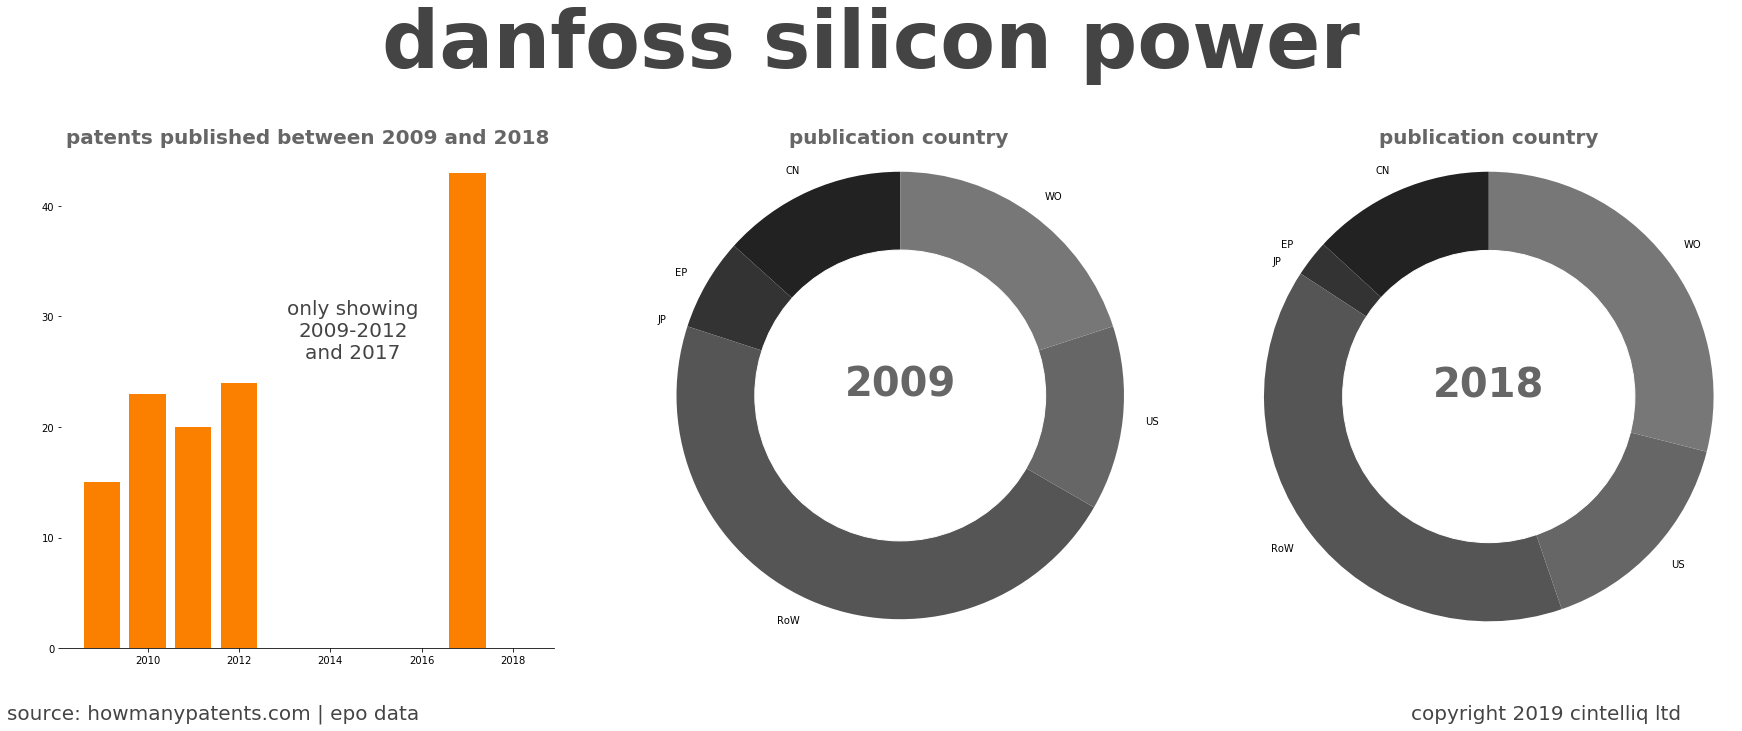 summary of patents for Danfoss Silicon Power